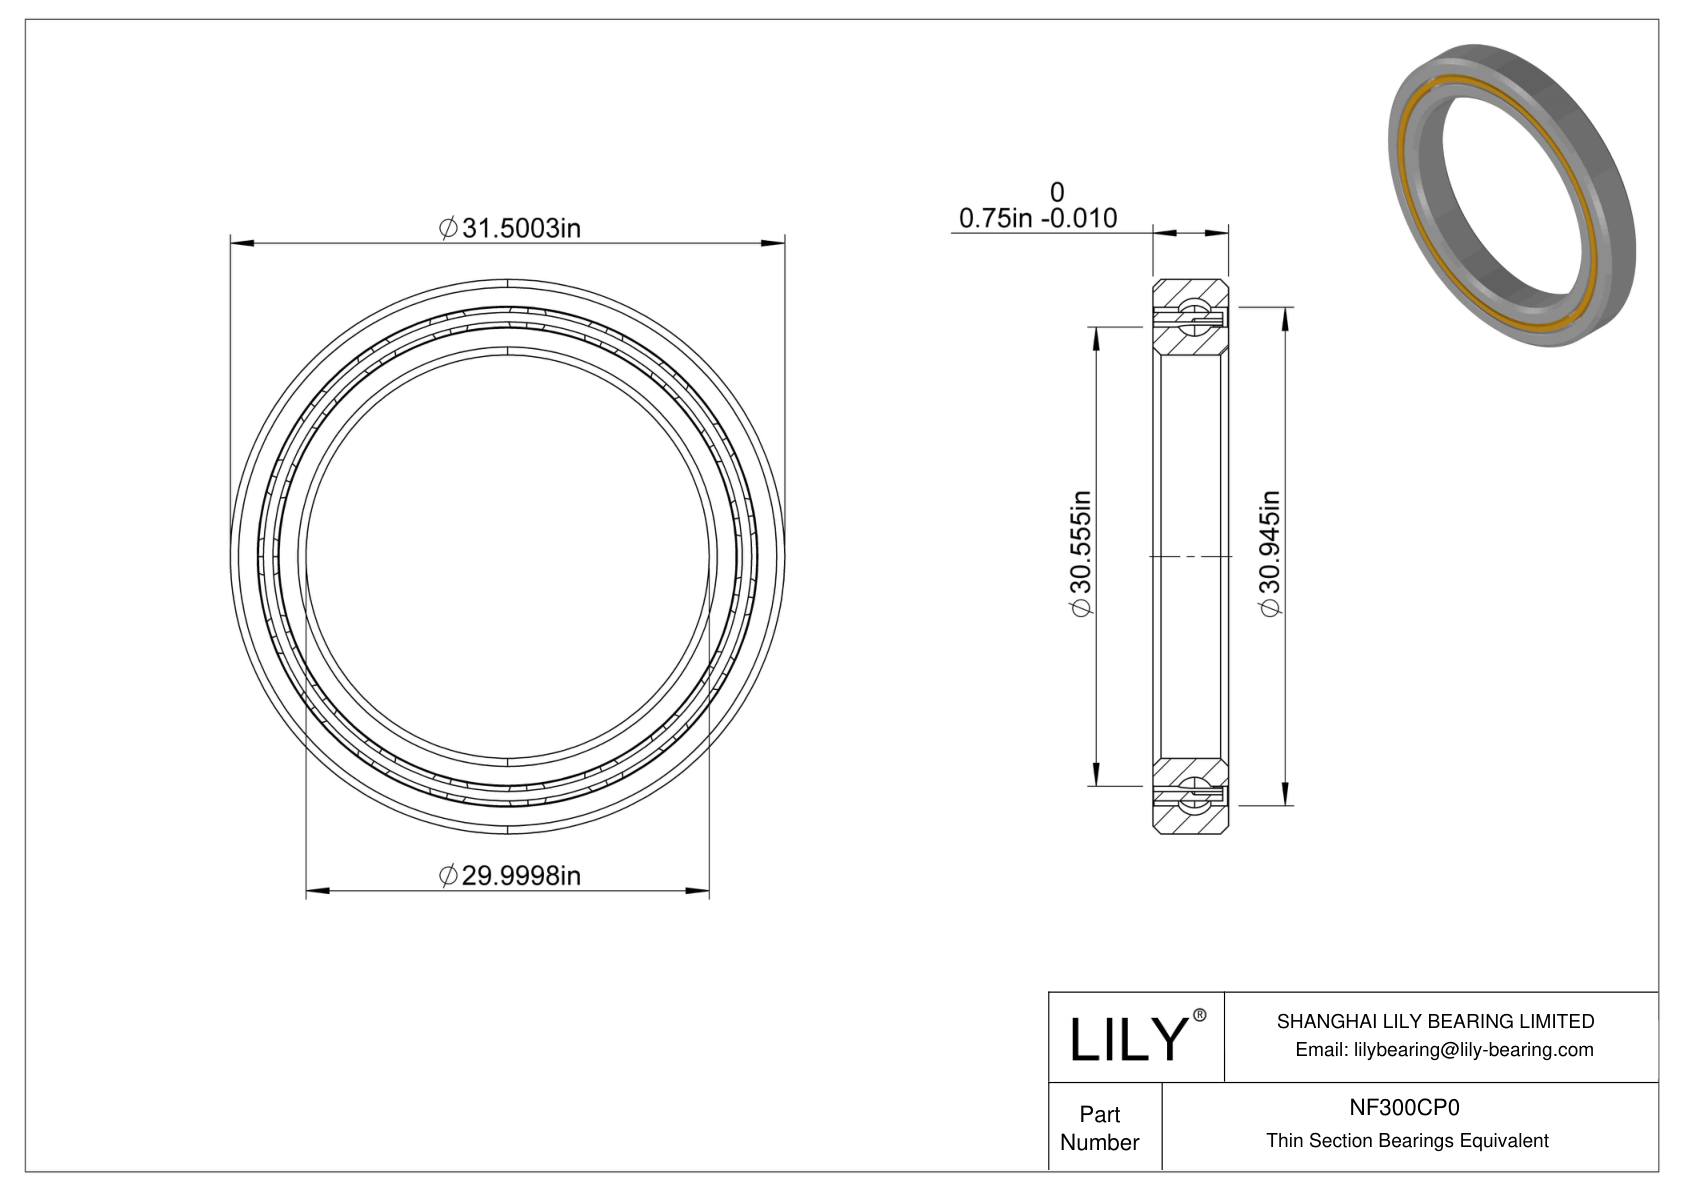 NF300CP0 Constant Section (CS) Bearings cad drawing